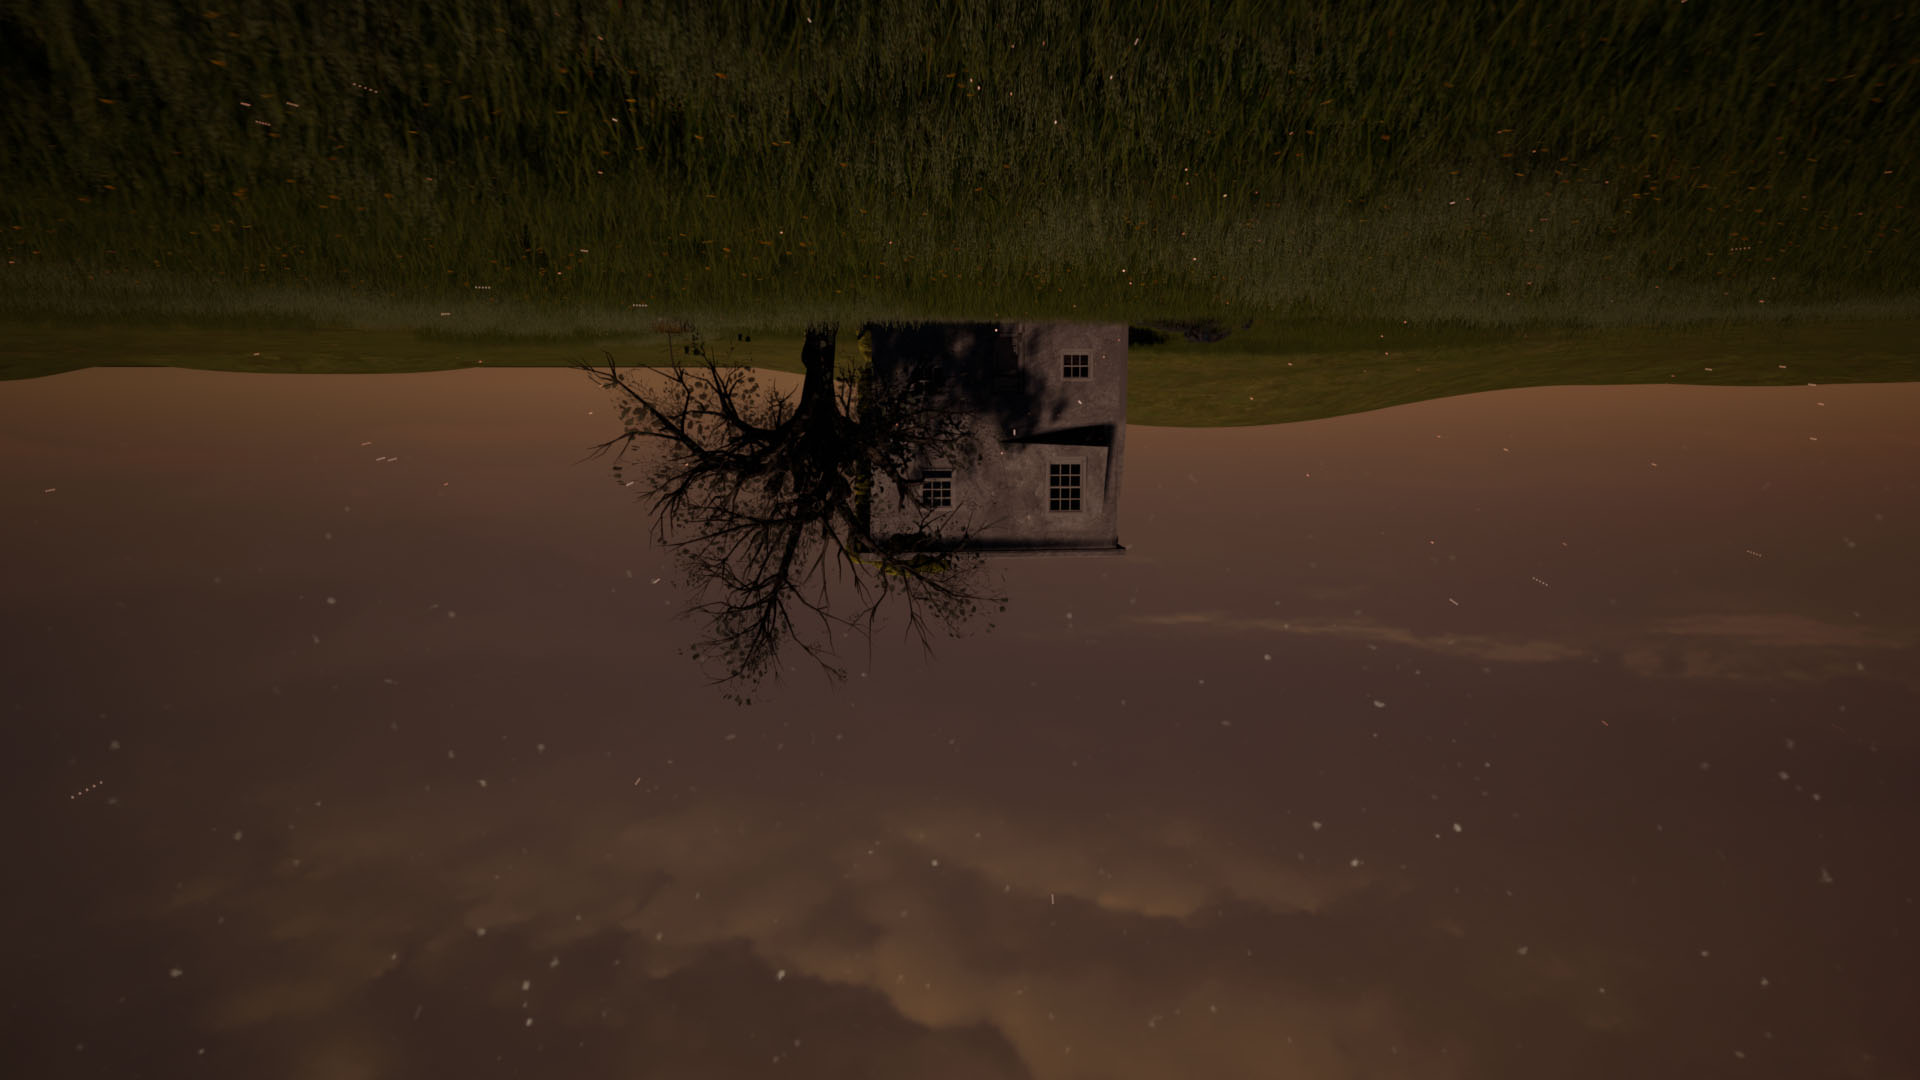 Screenshot from the game with an inverted world, showing a house, a tree, and grass against a grey sky.